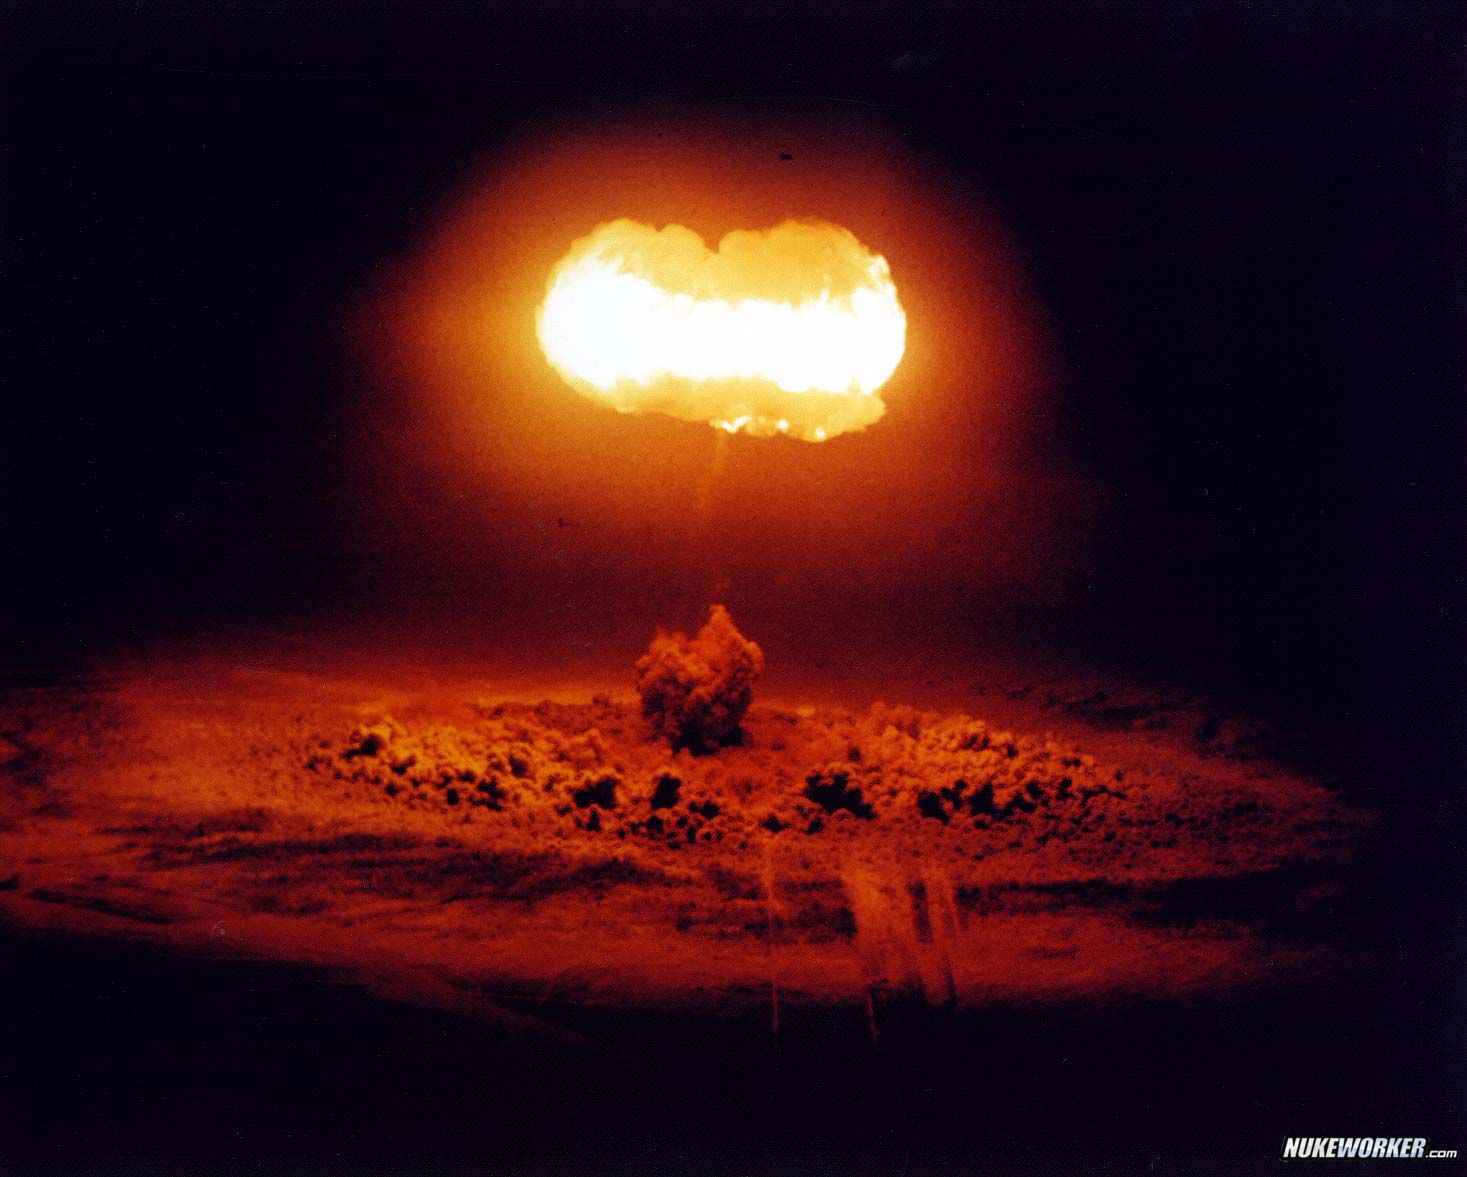 The Stokes Test
The Stokes Test, conducted at the Nevada Test Site on August 7, 1957 was a 19 kiloton device exploded from a balloon.

Operation Plumbob, number 99. 
Keywords: Nevada Test Site, Mercury, Nye County, Nevada NTS